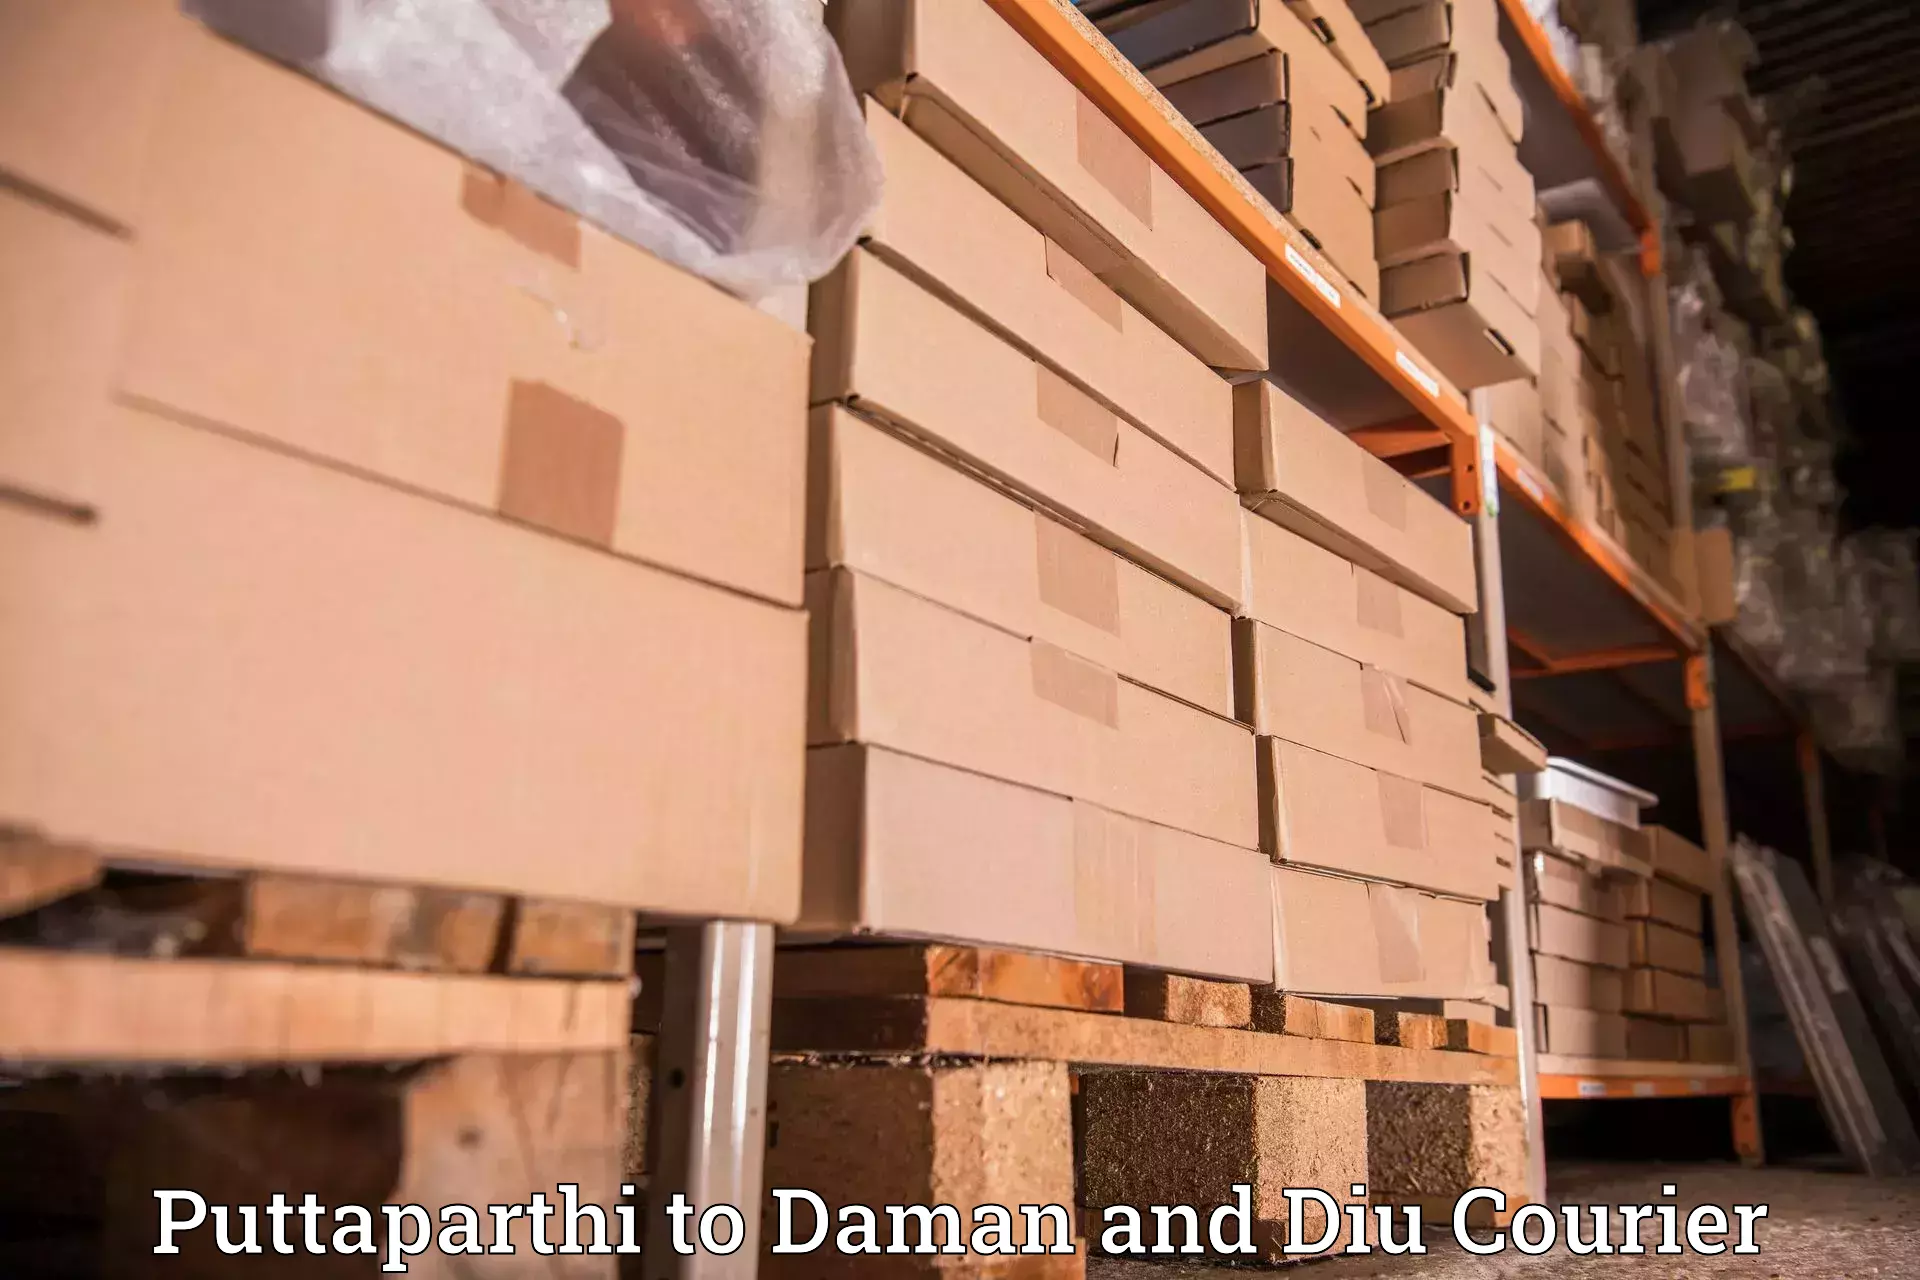 Reliable courier service Puttaparthi to Daman and Diu